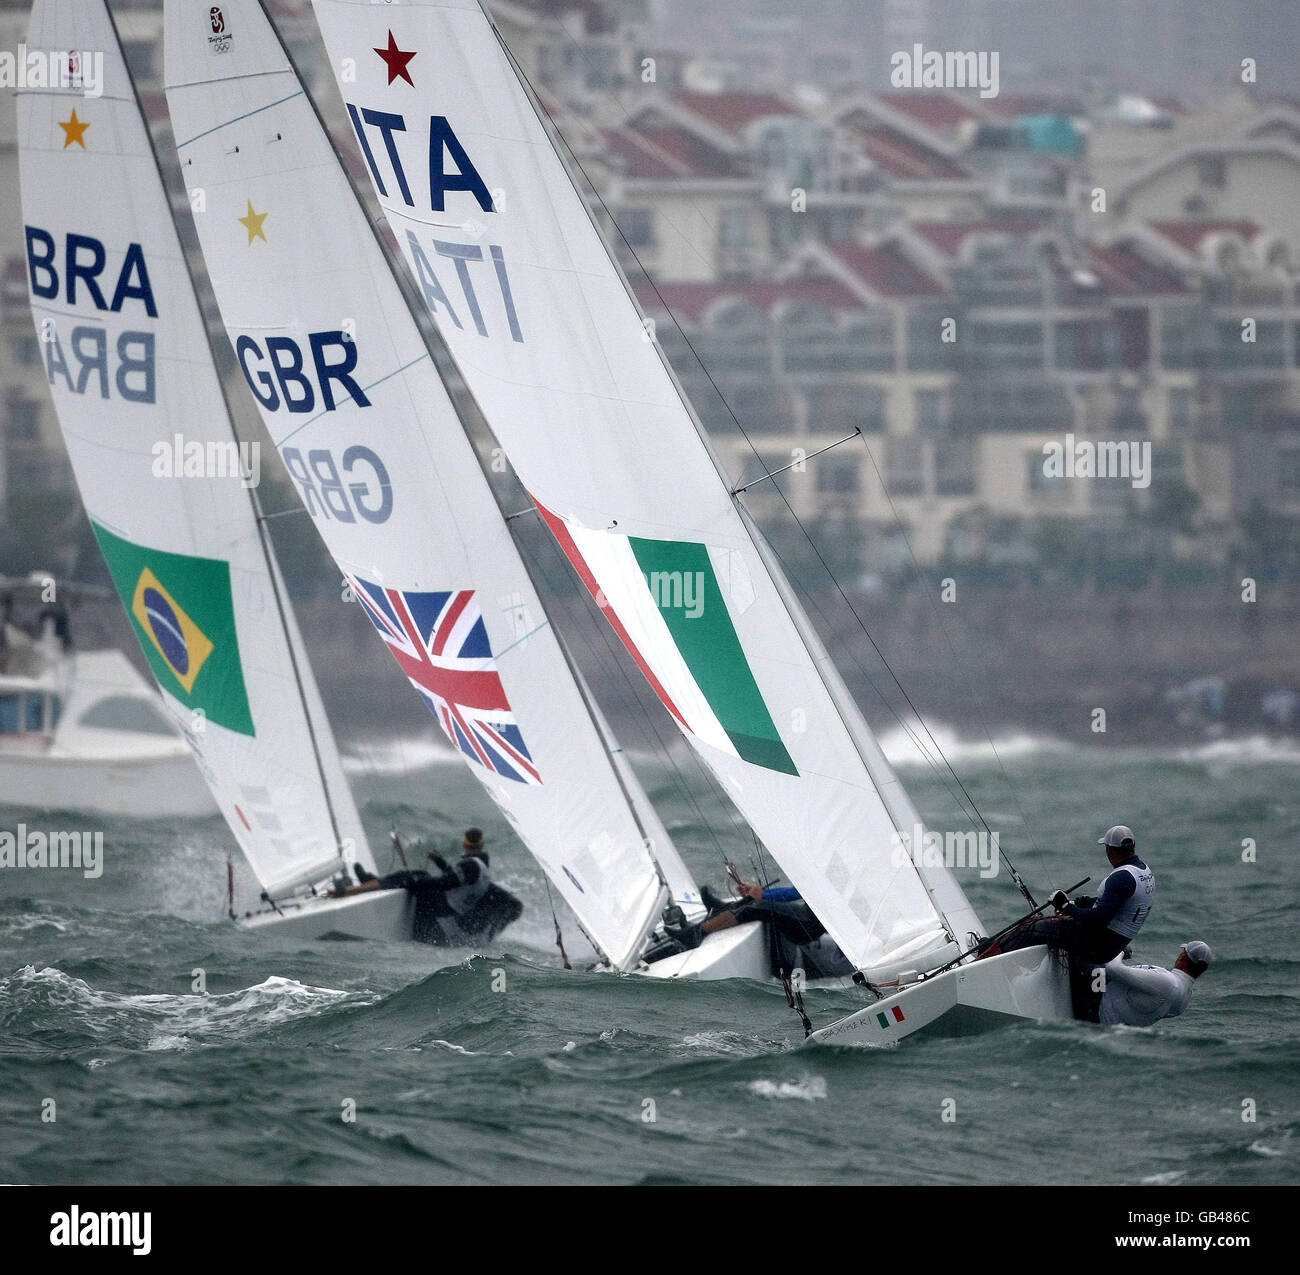 Star crews from Brazil, Great Britain and Italy head upwind during the final round of their Beijing Olympic competition off Qingdao, China Stock Photo